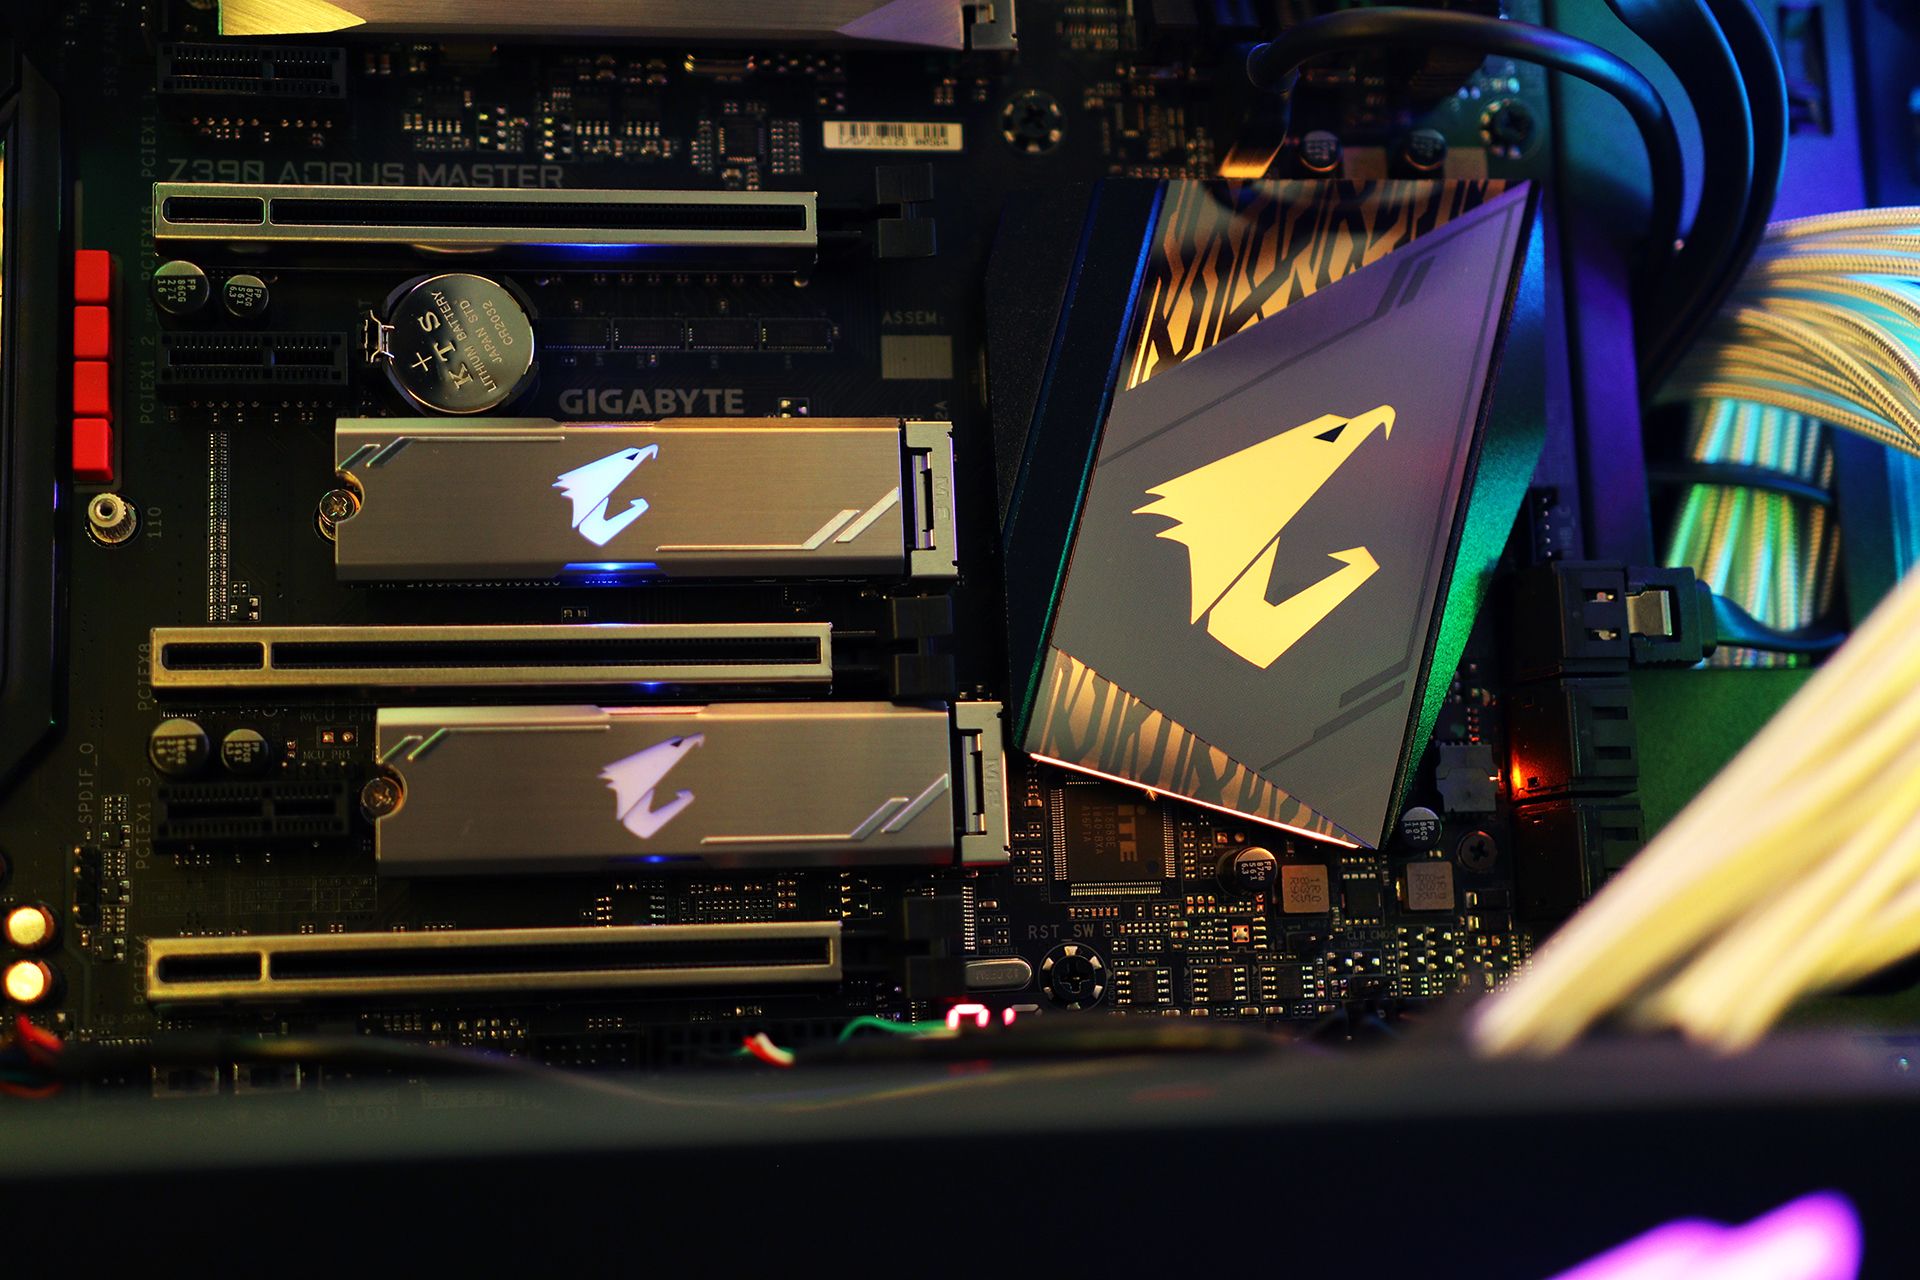 hykleri børste Kollektive AORUS on Twitter: "It's like a puzzle 🧩 🧩 assembled to perfection 👌🏻  Finish your build with the AORUS RGB M.2 NVMe SSD! . Available in 256GB  &amp; 512GB! 👍🏻👍🏻 🛒 256GB